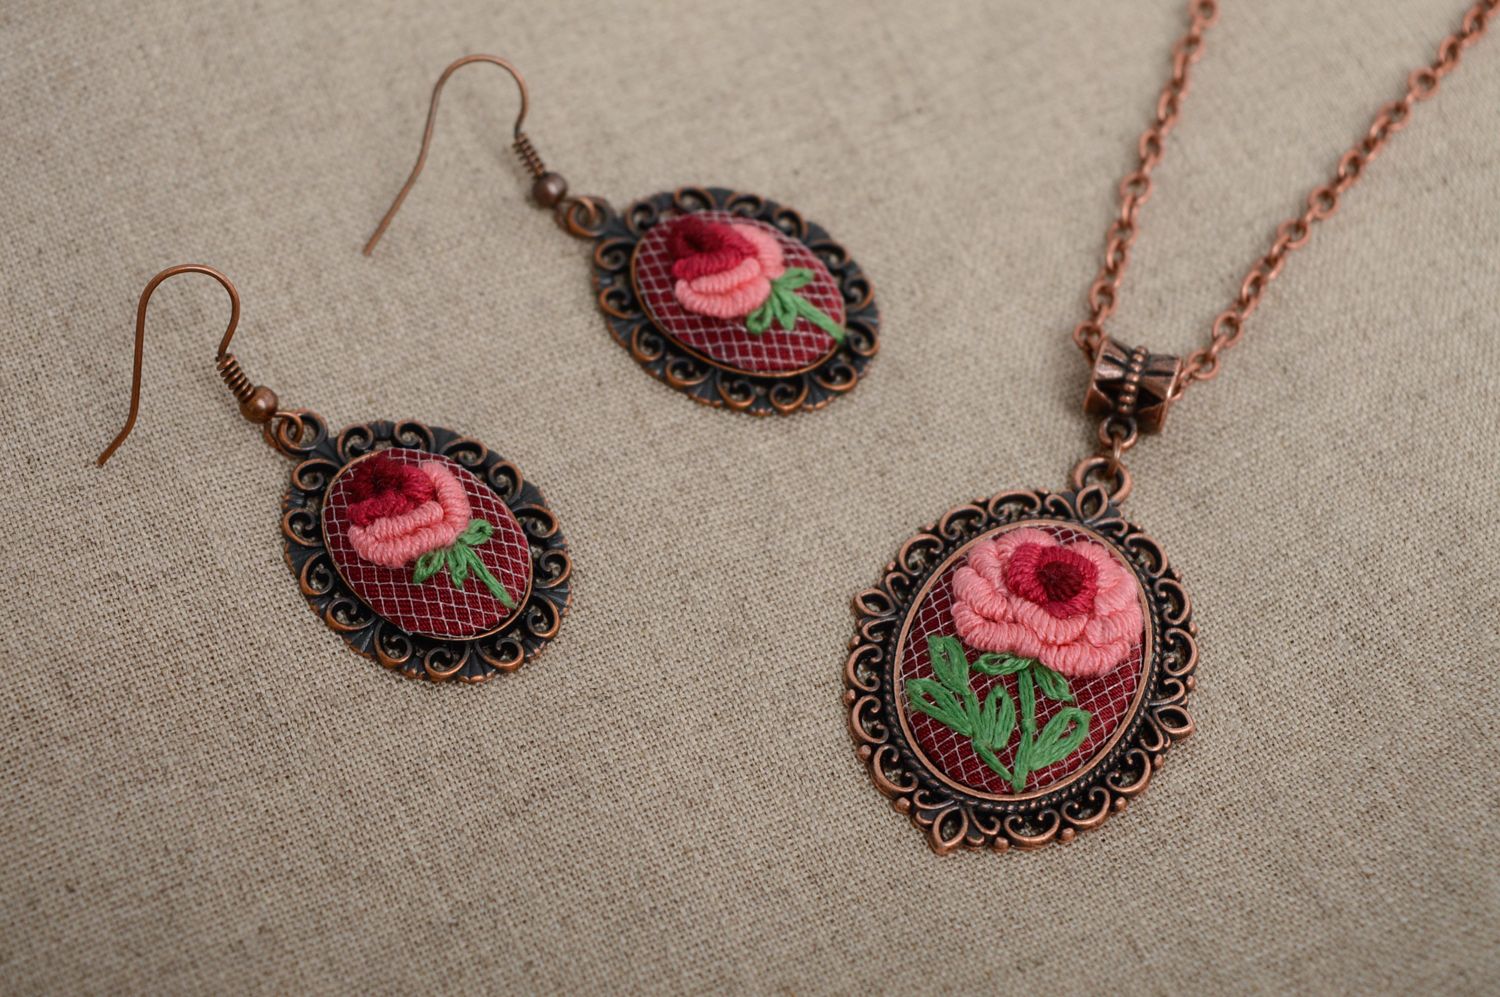 Earrings and pendant in vintage style photo 1